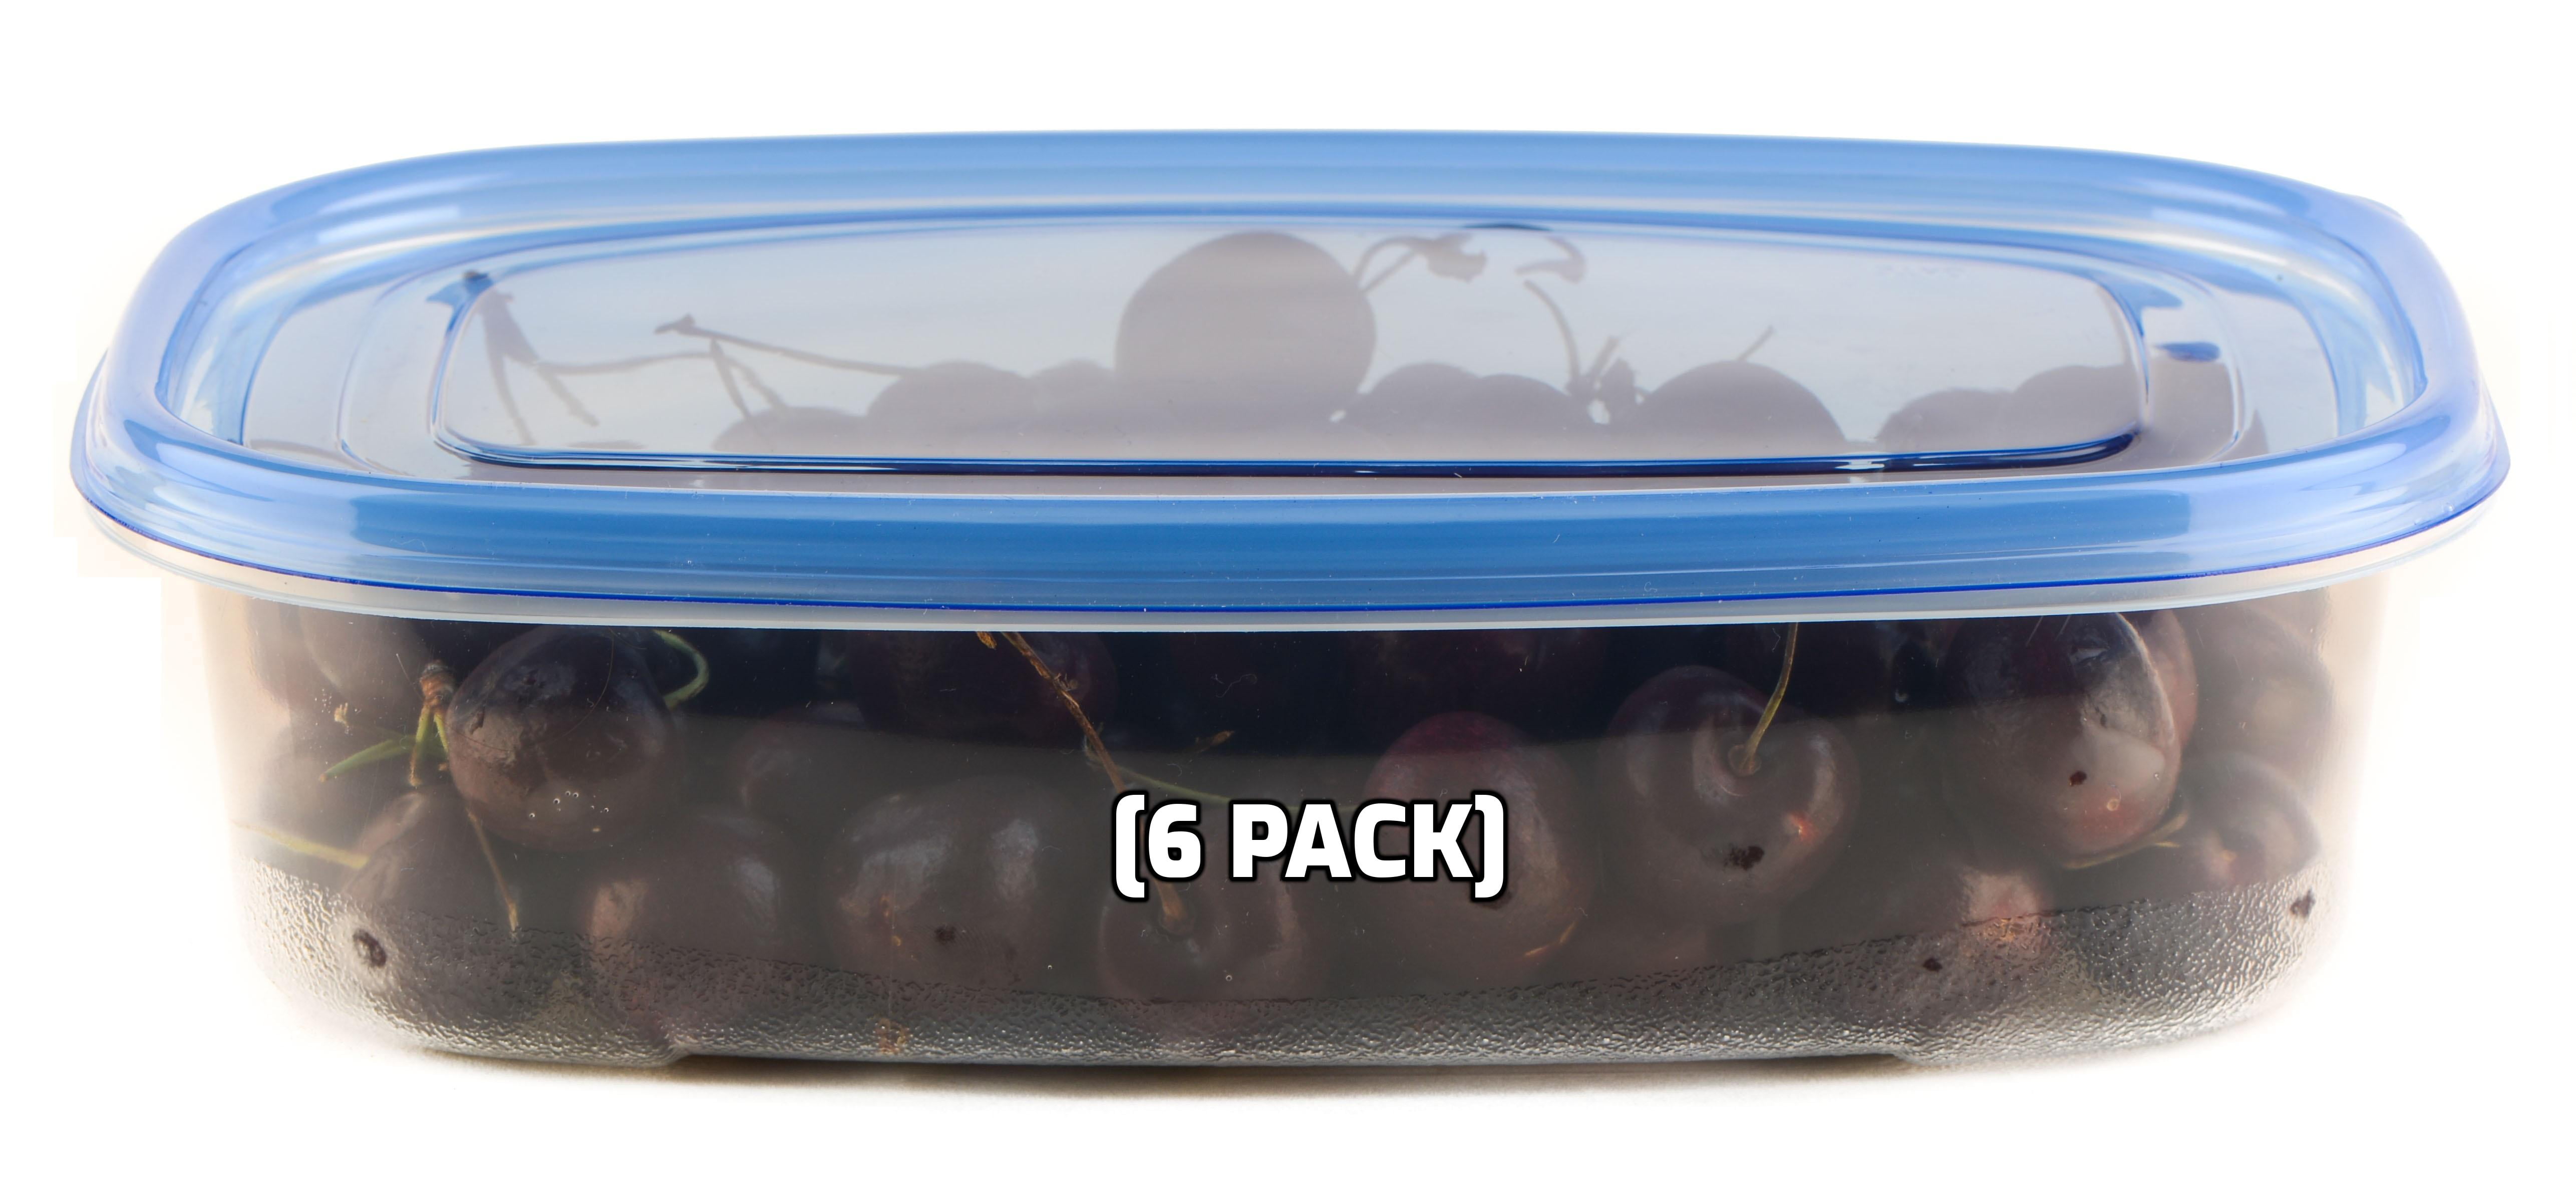 Meal Prep Container with Lids, 50 Pack Divided Food Storage Containers  Microwave Safe 2 Compartment Disposable Bento Box Reusable To-go Container